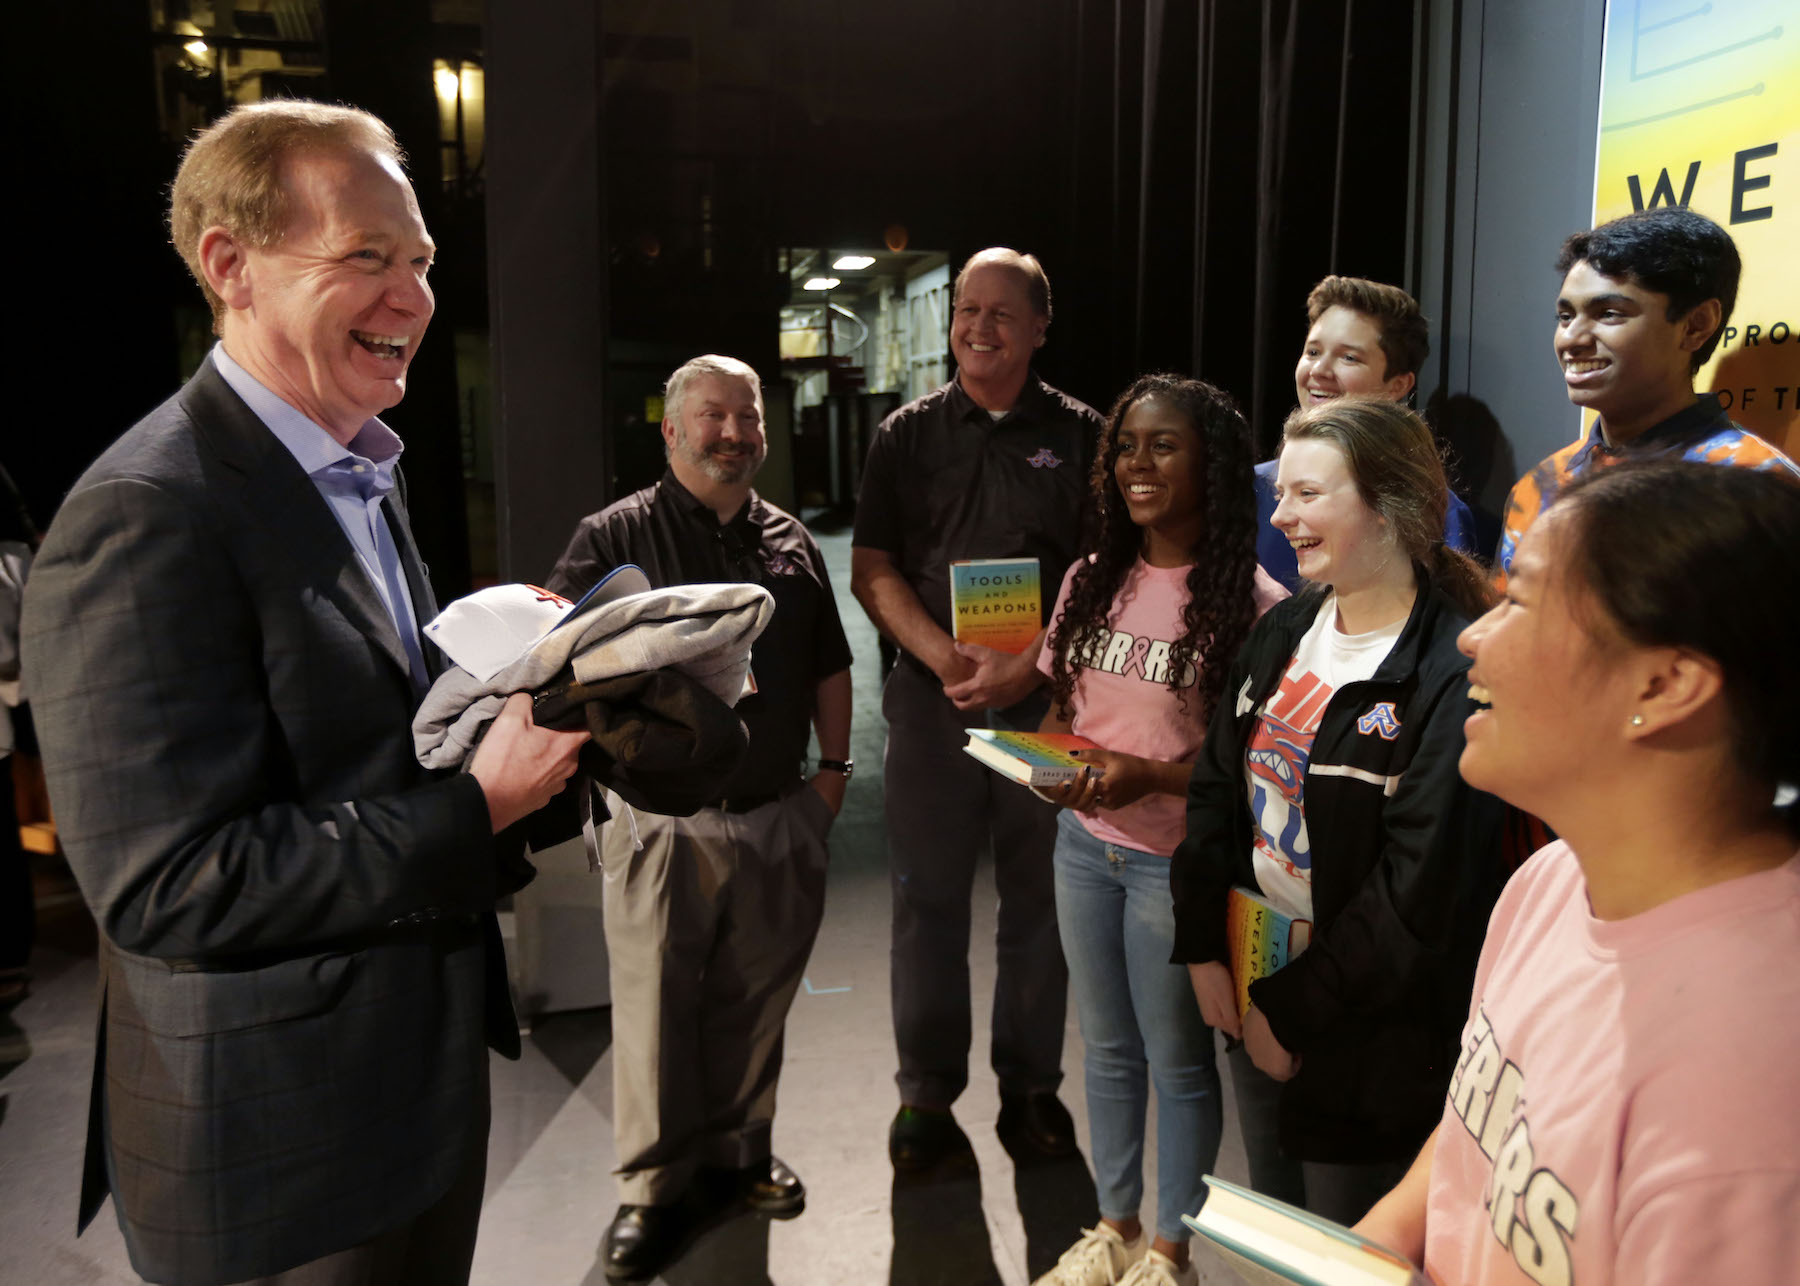 Microsoft President Brad Smith shares a laugh with students from Appleton West High School on the stage of Stansbury Theatre following his book discussion